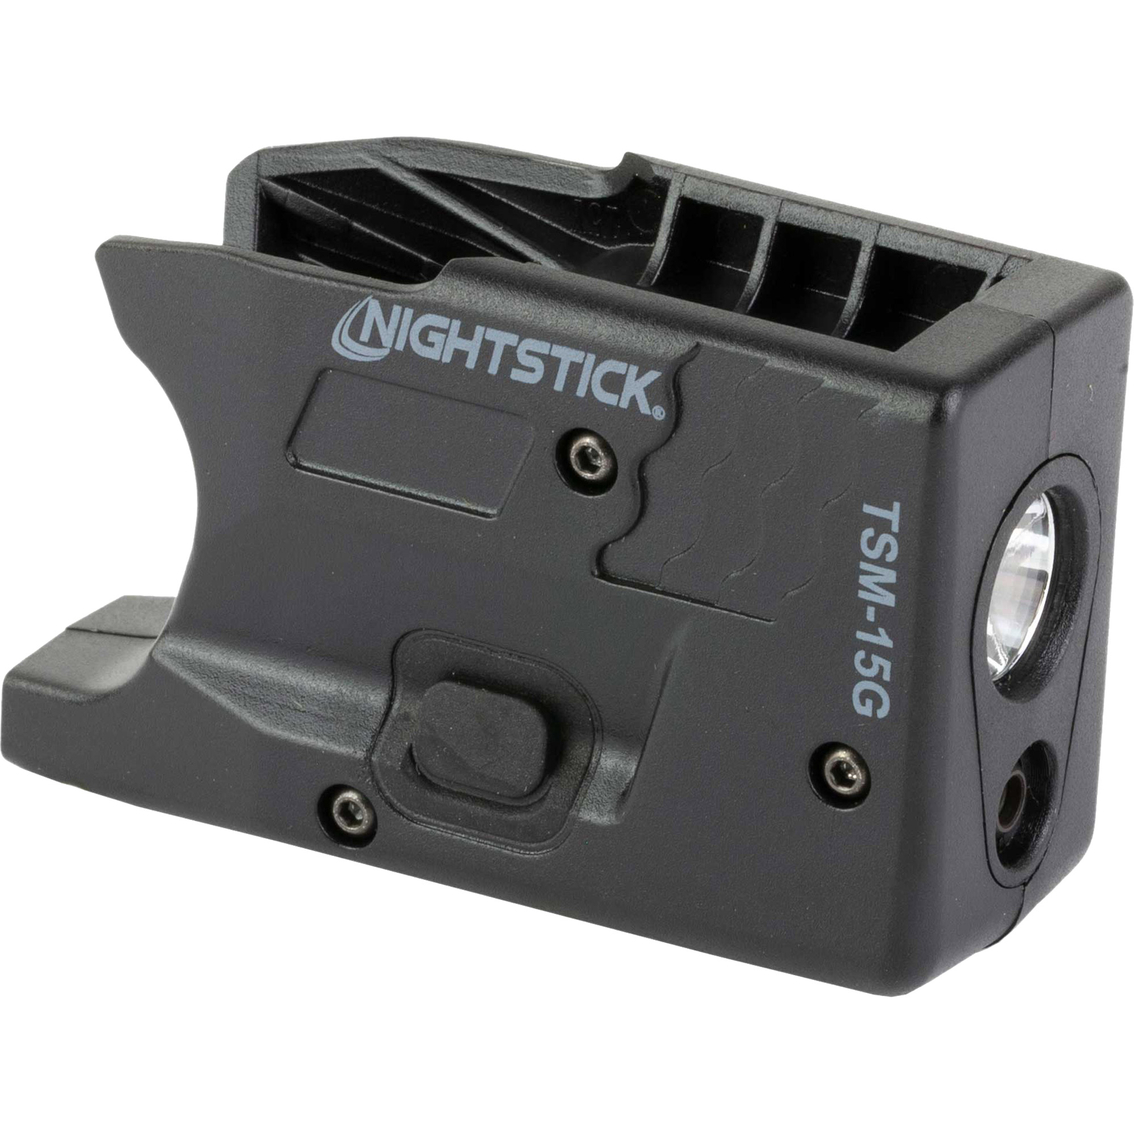 Nightstick Tsm-15g Compact Weaponlight With Green Laser Fits S&w Shield ...